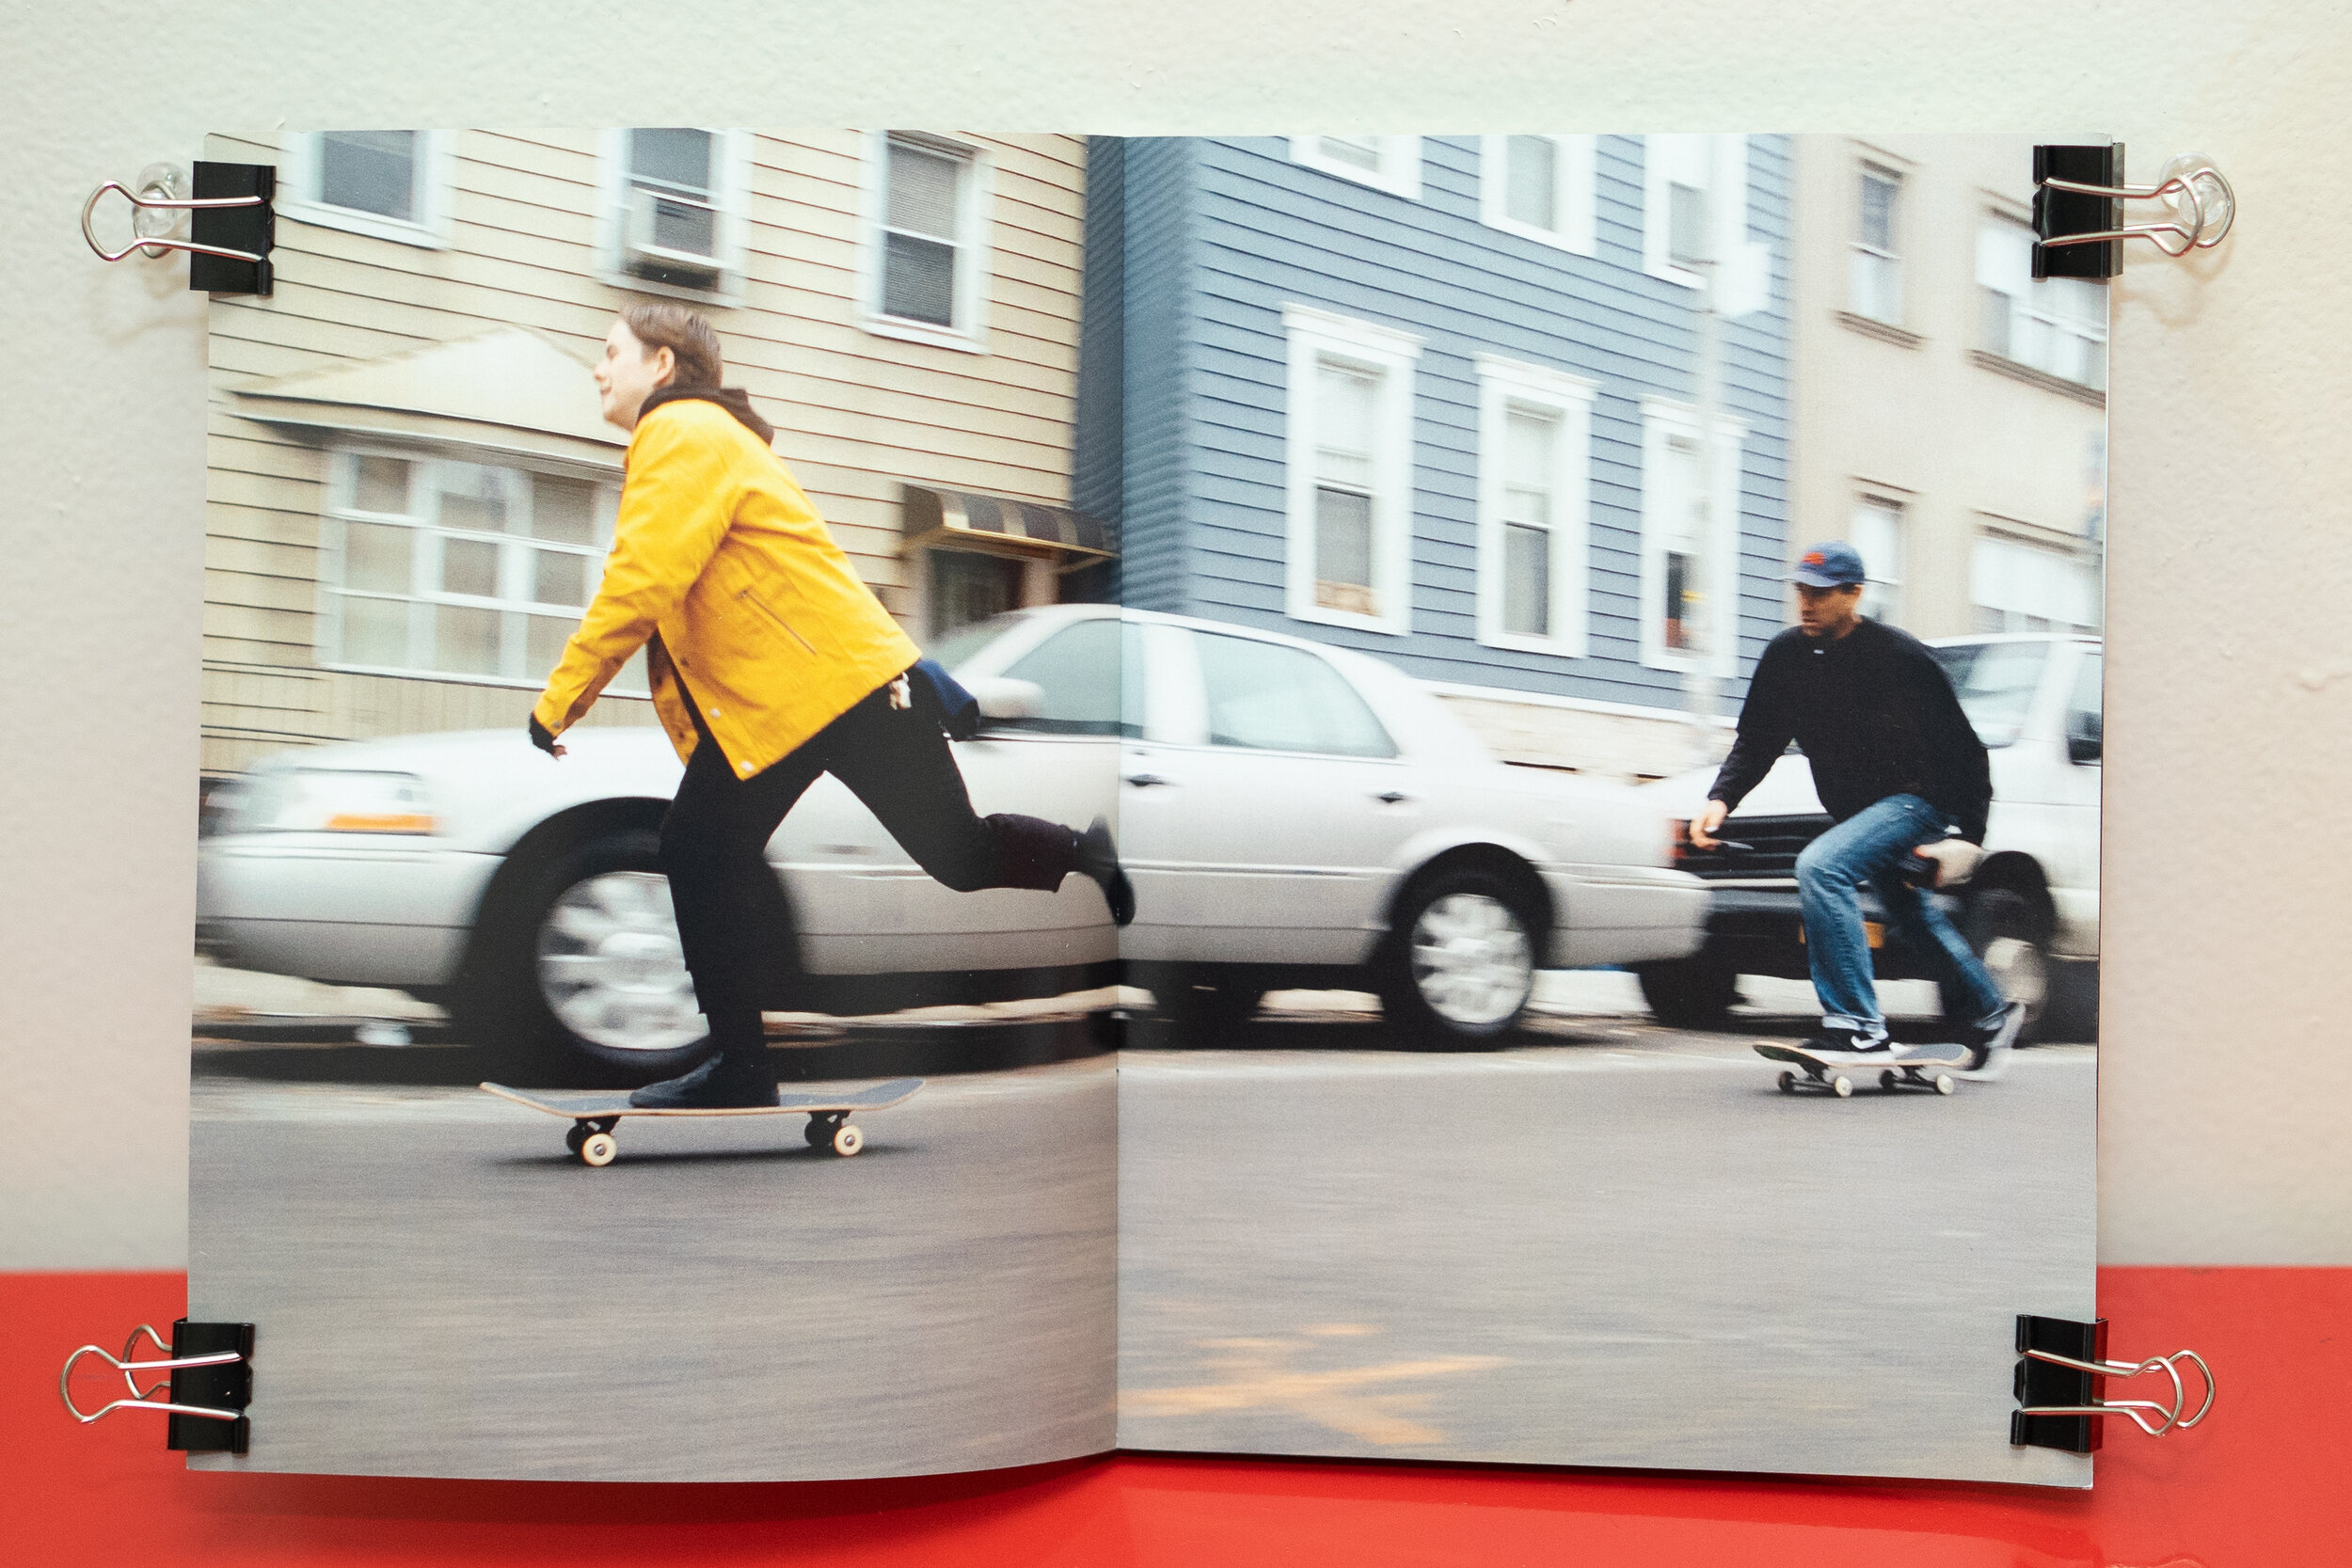  Leo Baker and Brian Anderson - image shot by Richard Quintero 